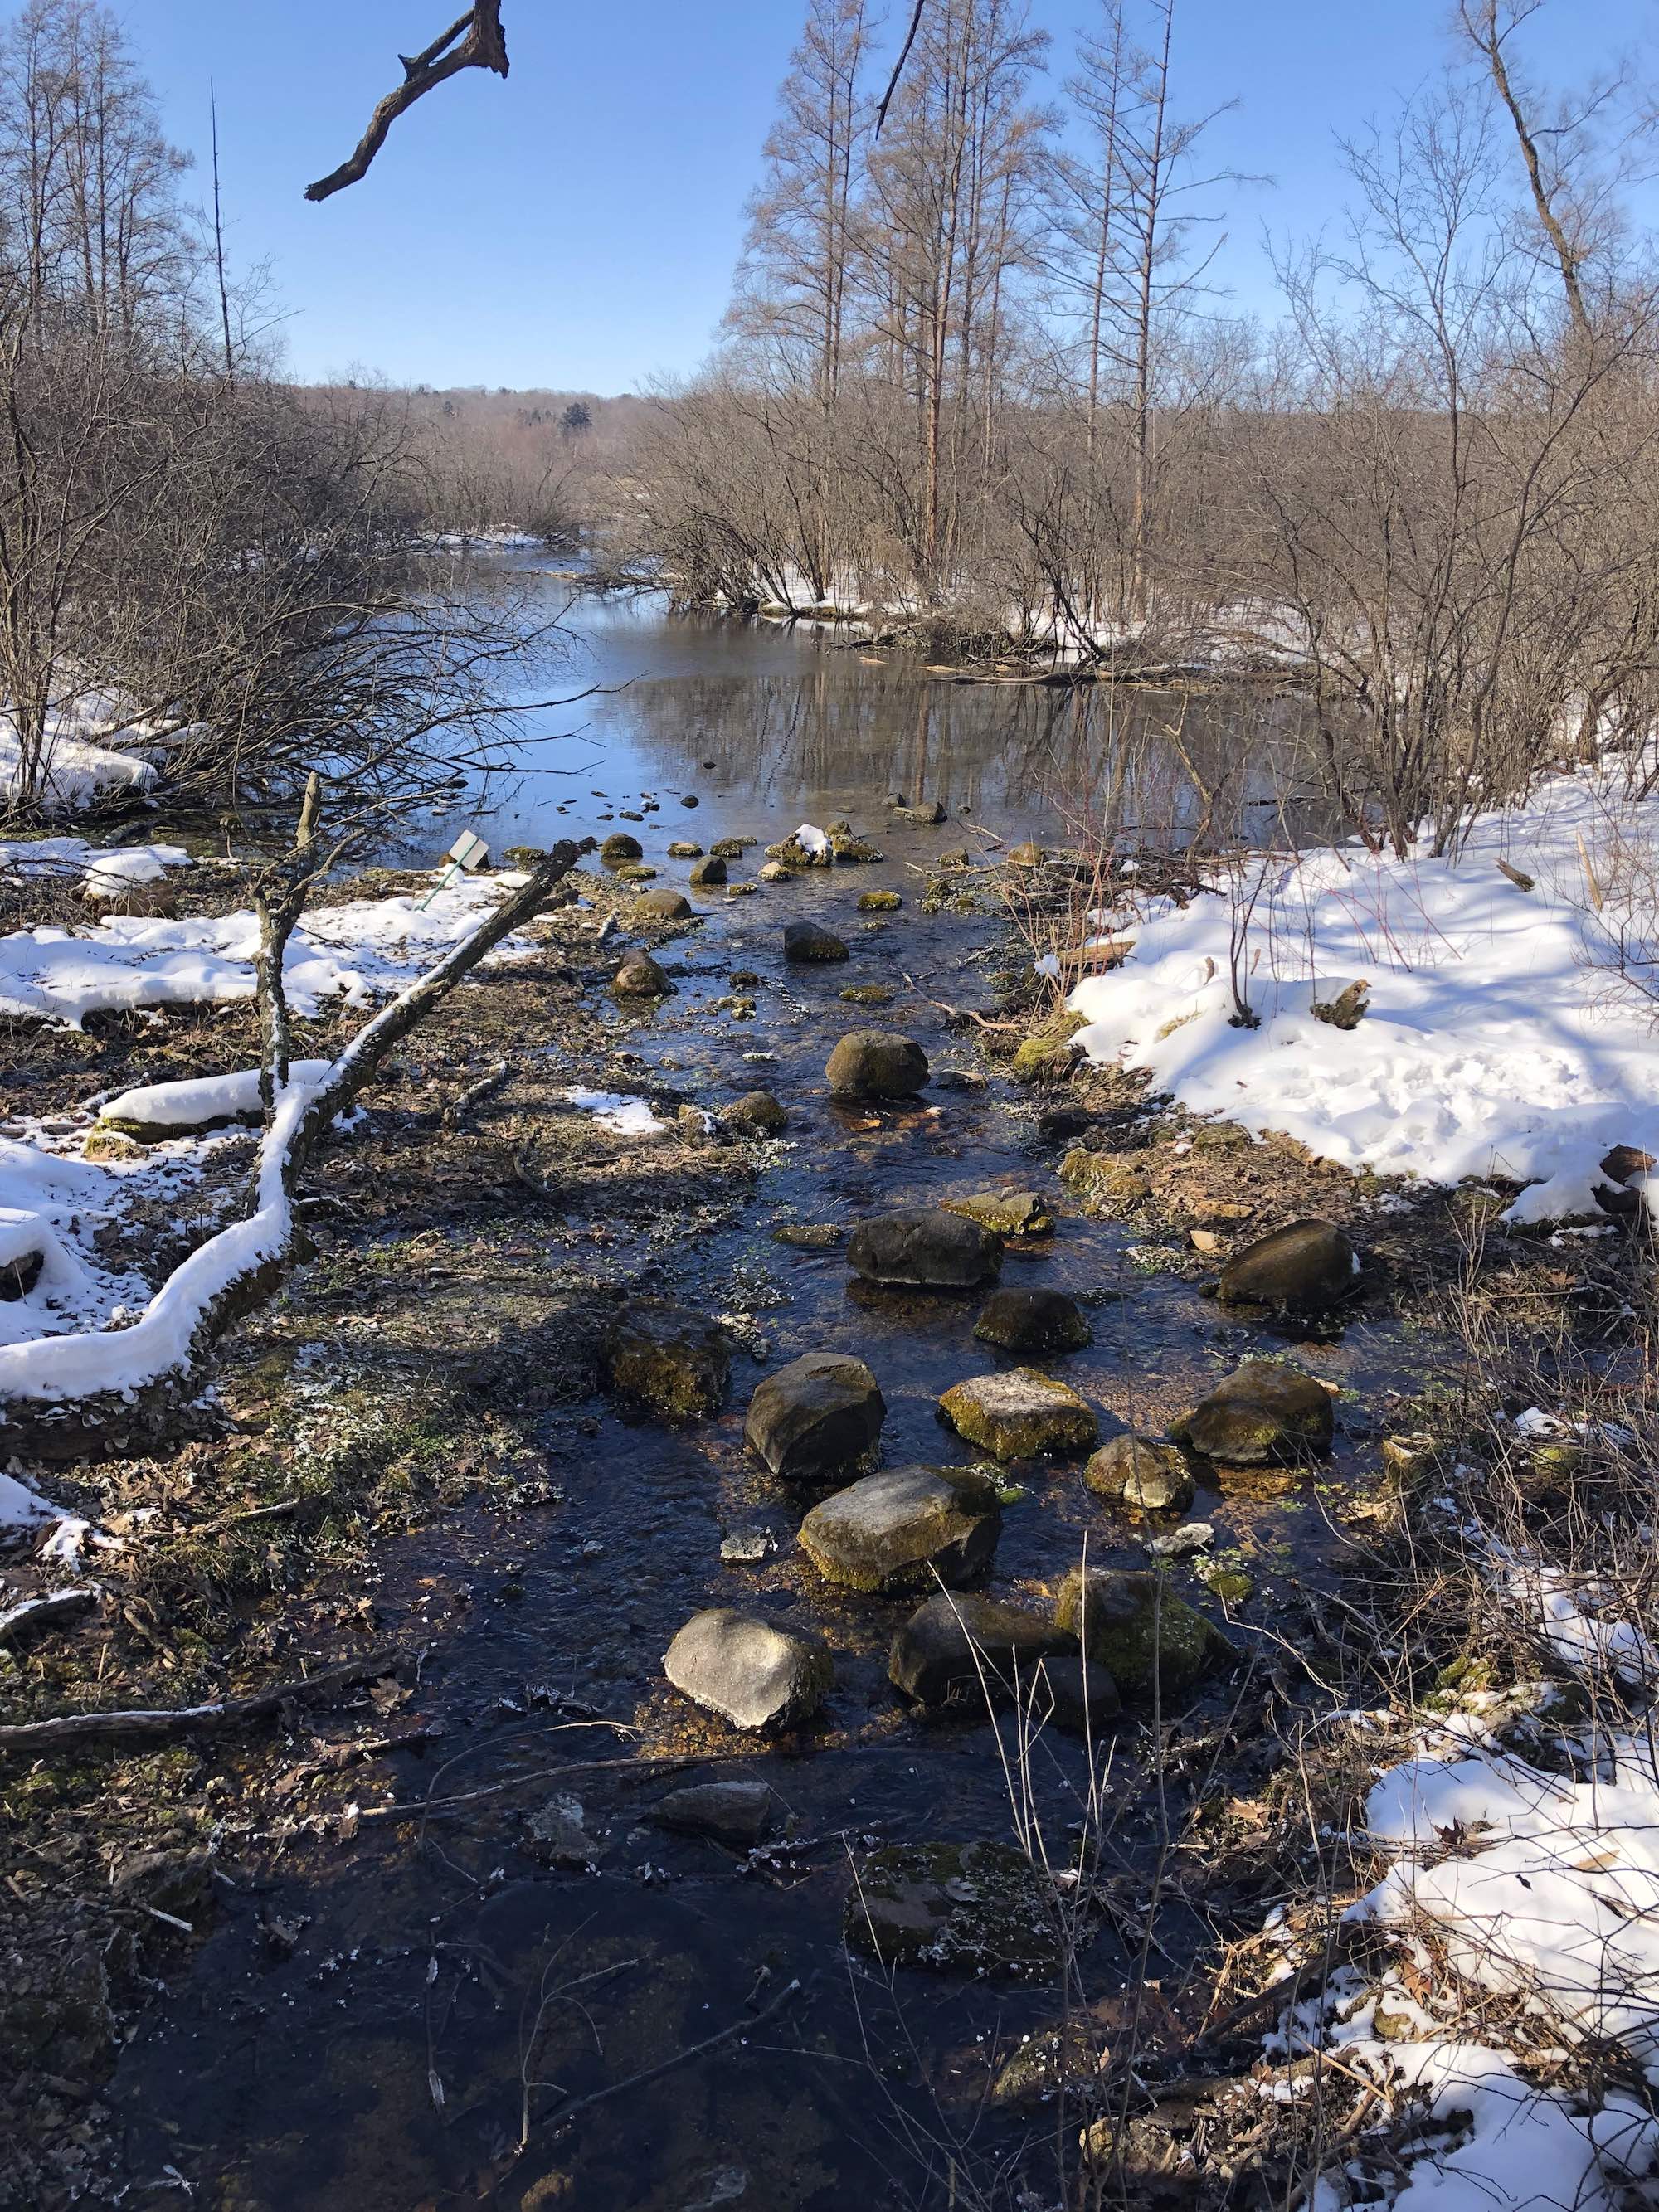 Big Spring flowing into Lake Wingra in the University of Wisconsin Arboretum on March 3, 2019.